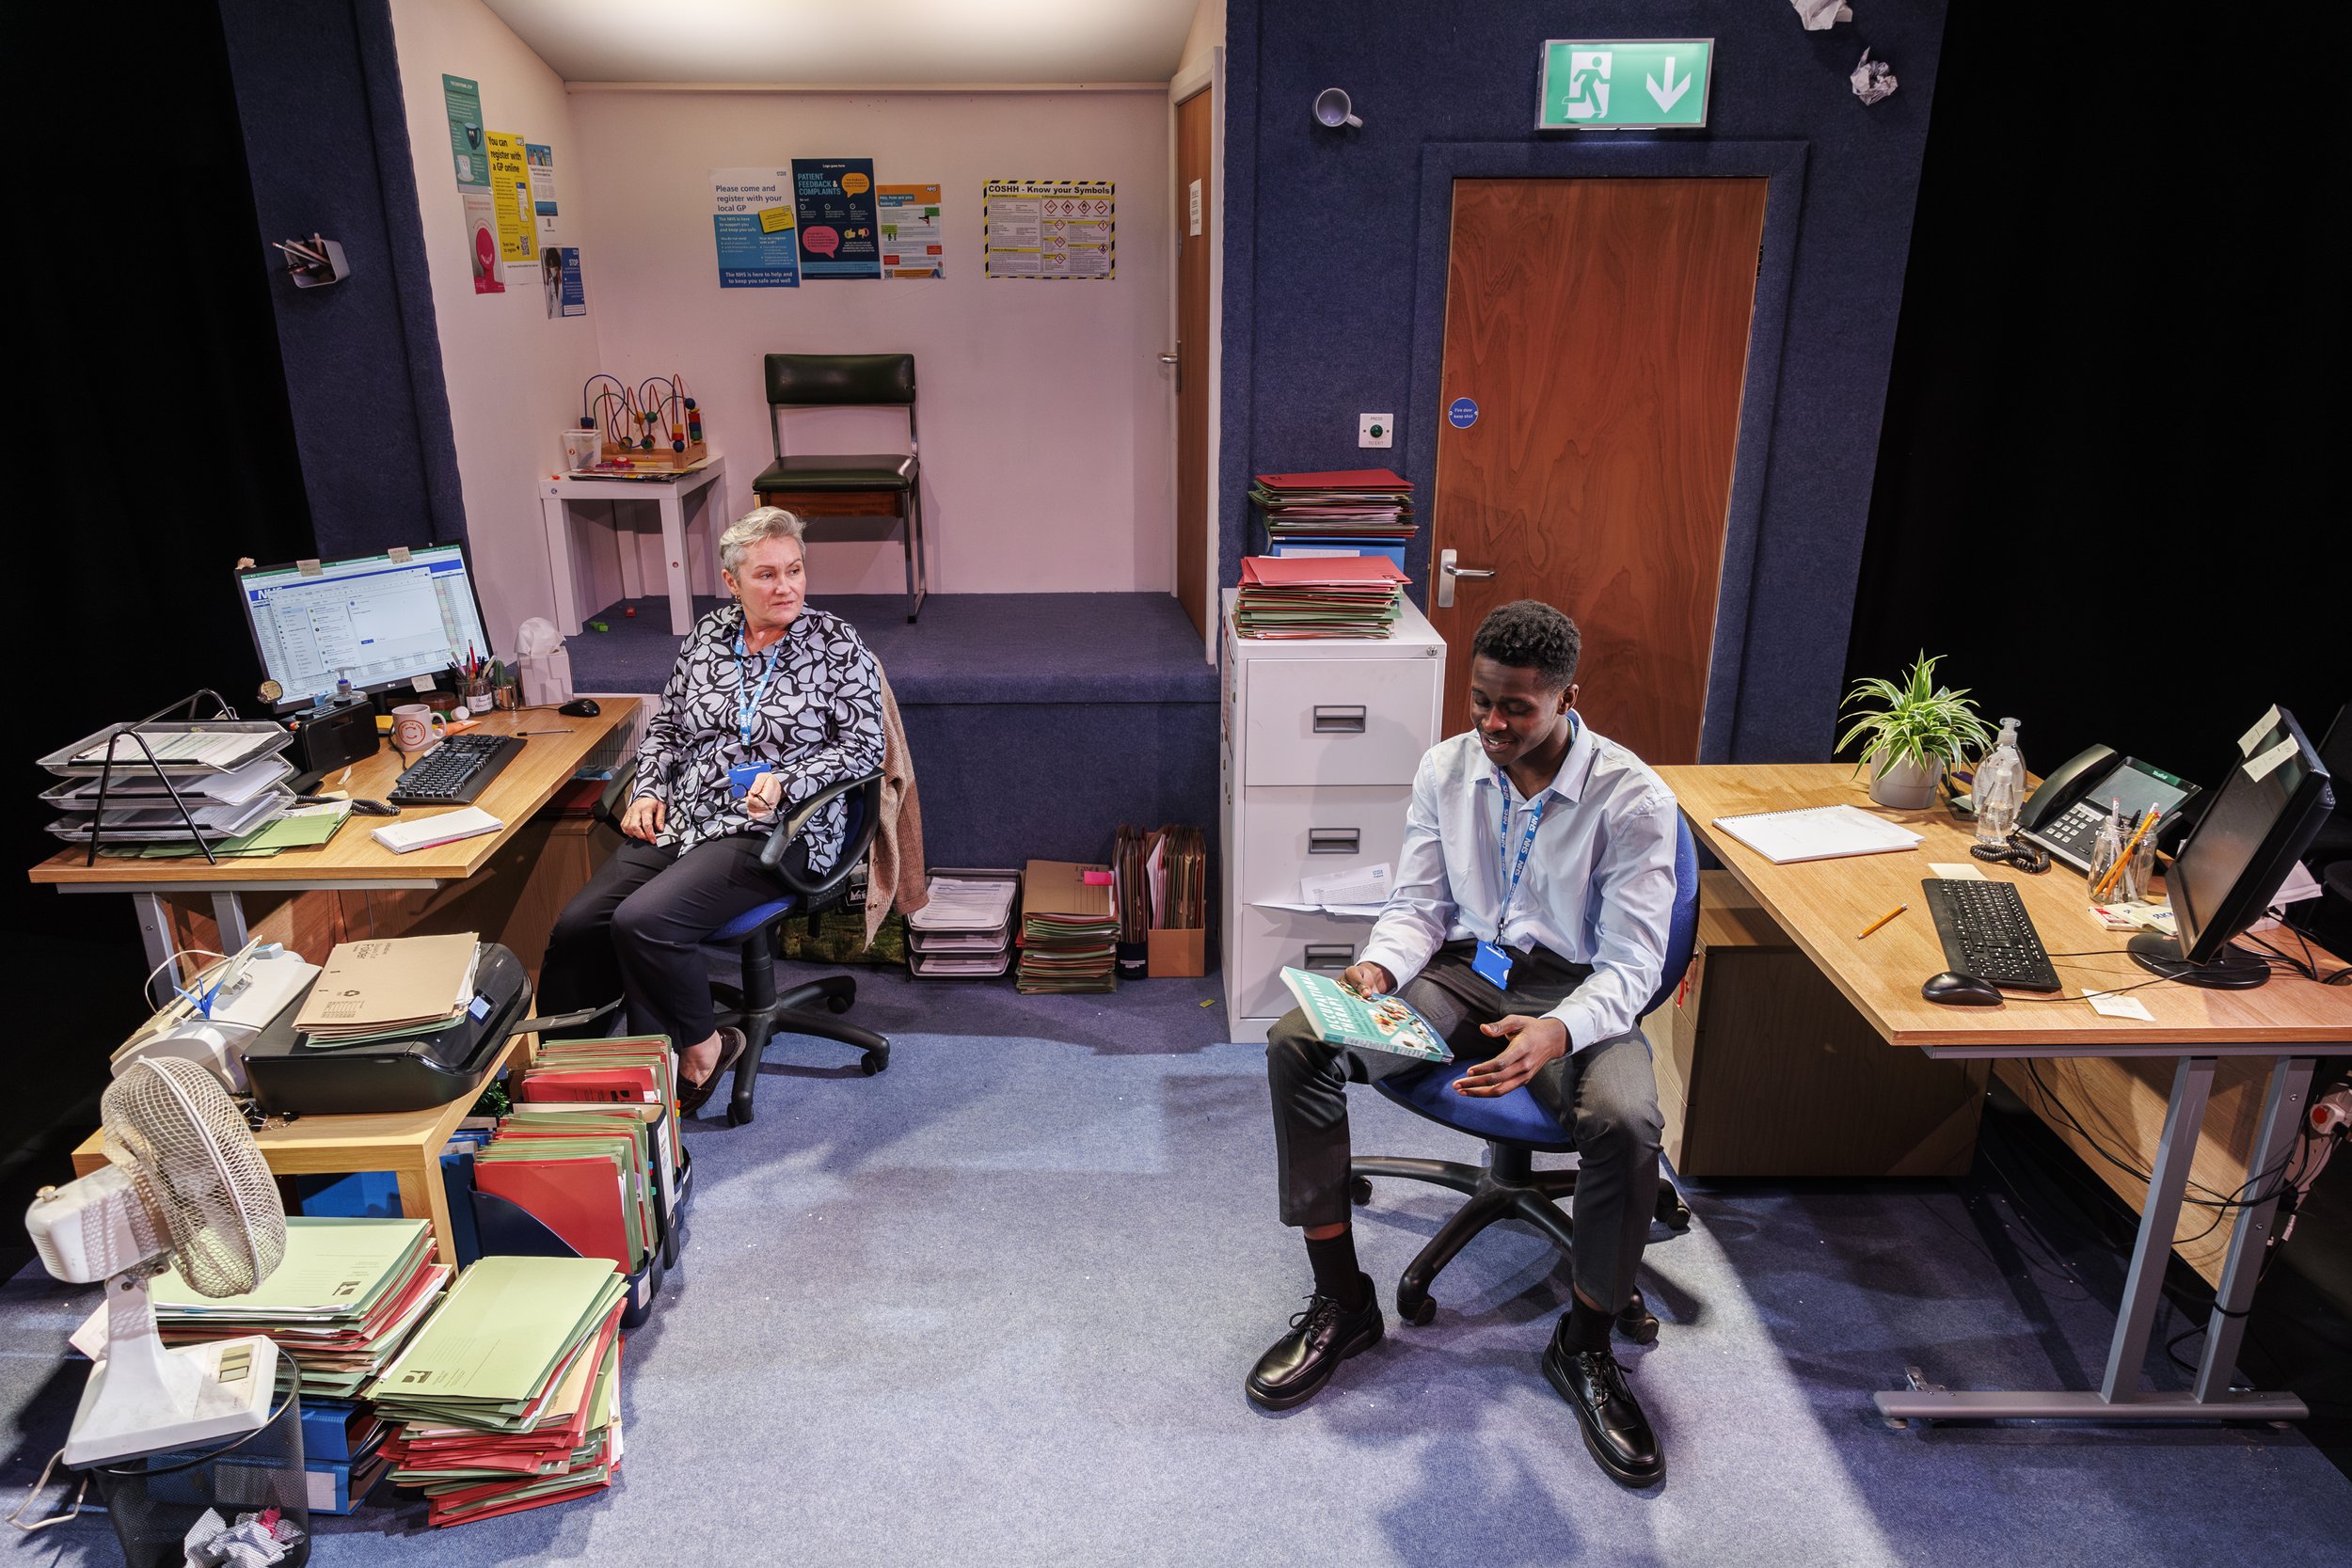  London Theatre: “Every detail has been considered in Alys Whitehead’s realist … set design. Stacks of files clutter every available surface, waste paper baskets overflow in corners of the room, and a small reception area covered in NHS support poste